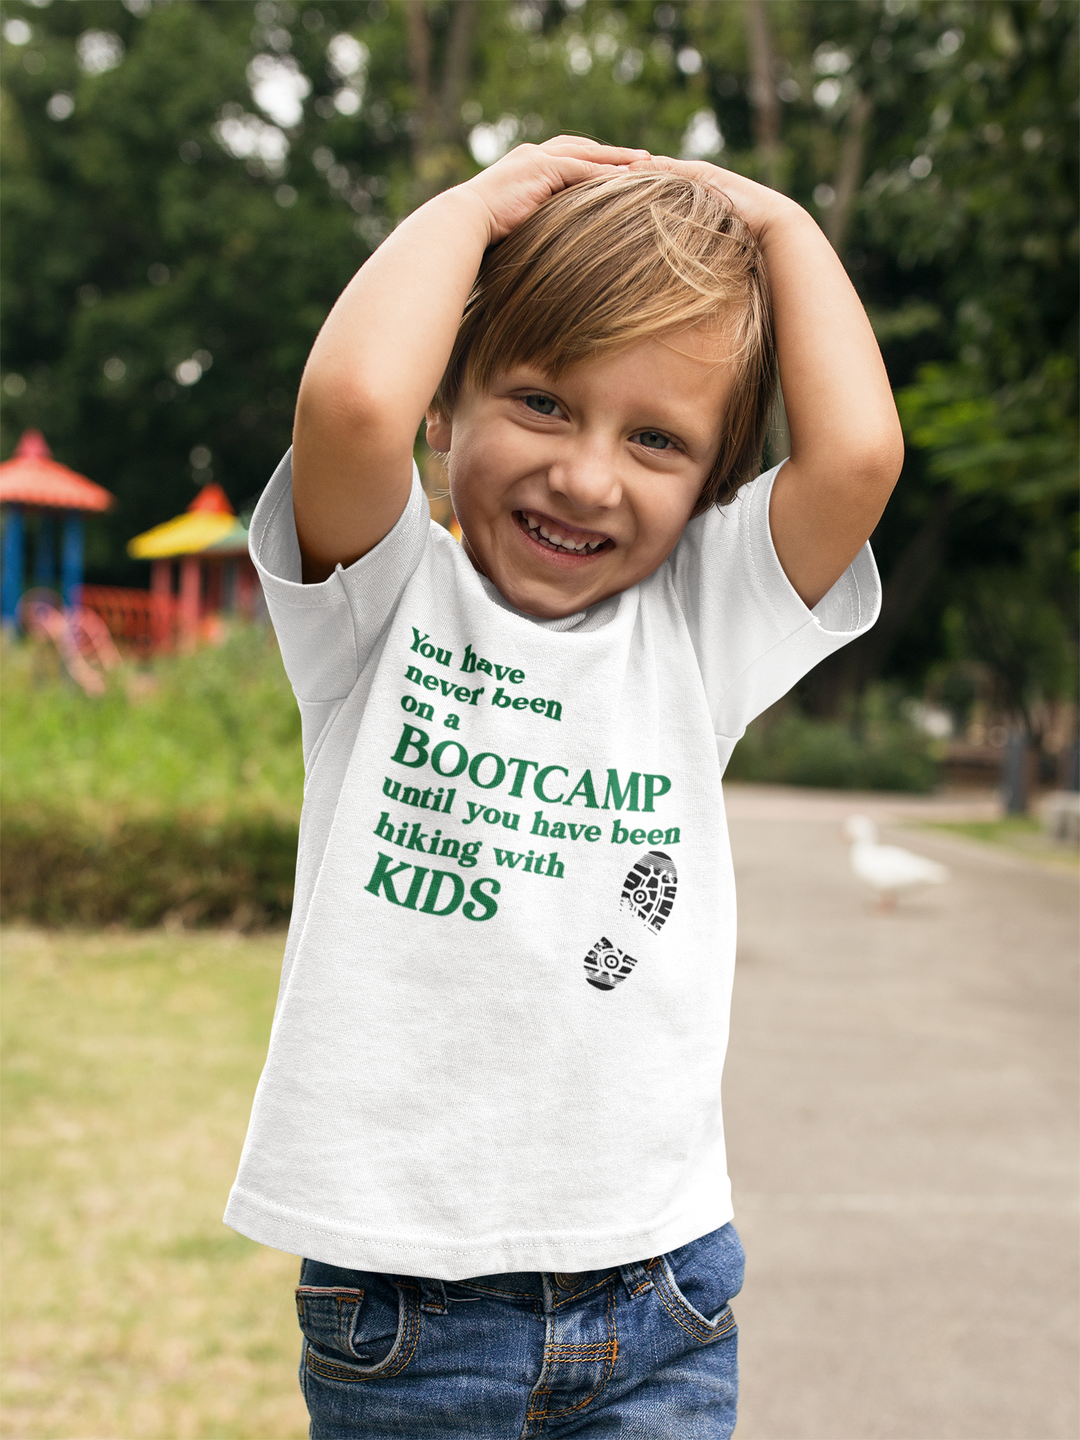 You Have Never Been Bootcamp. Short Sleeve T Shirt For Toddler And Kids. - TeesForToddlersandKids -  t-shirt - camping - you-have-never-been-bootcamp-short-sleeve-t-shirt-for-toddler-and-kids